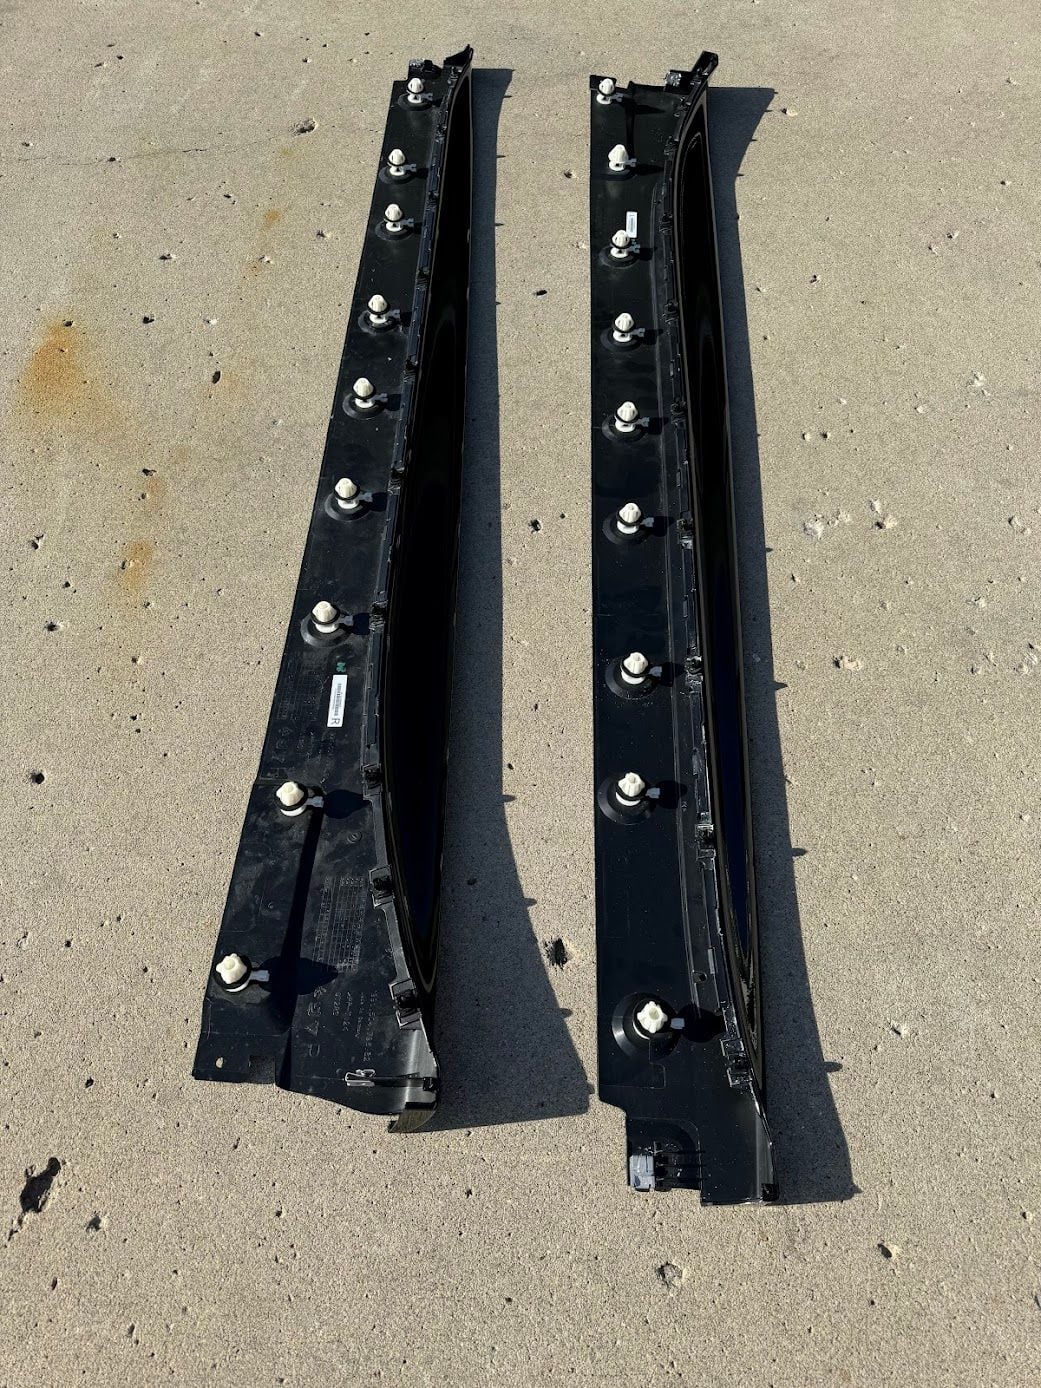 Exterior Body Parts - GT3 side skirts for a 911. Painted AND PPF'd - New - 2011 to 2019 Porsche 911 - Fargo, ND 58103, United States